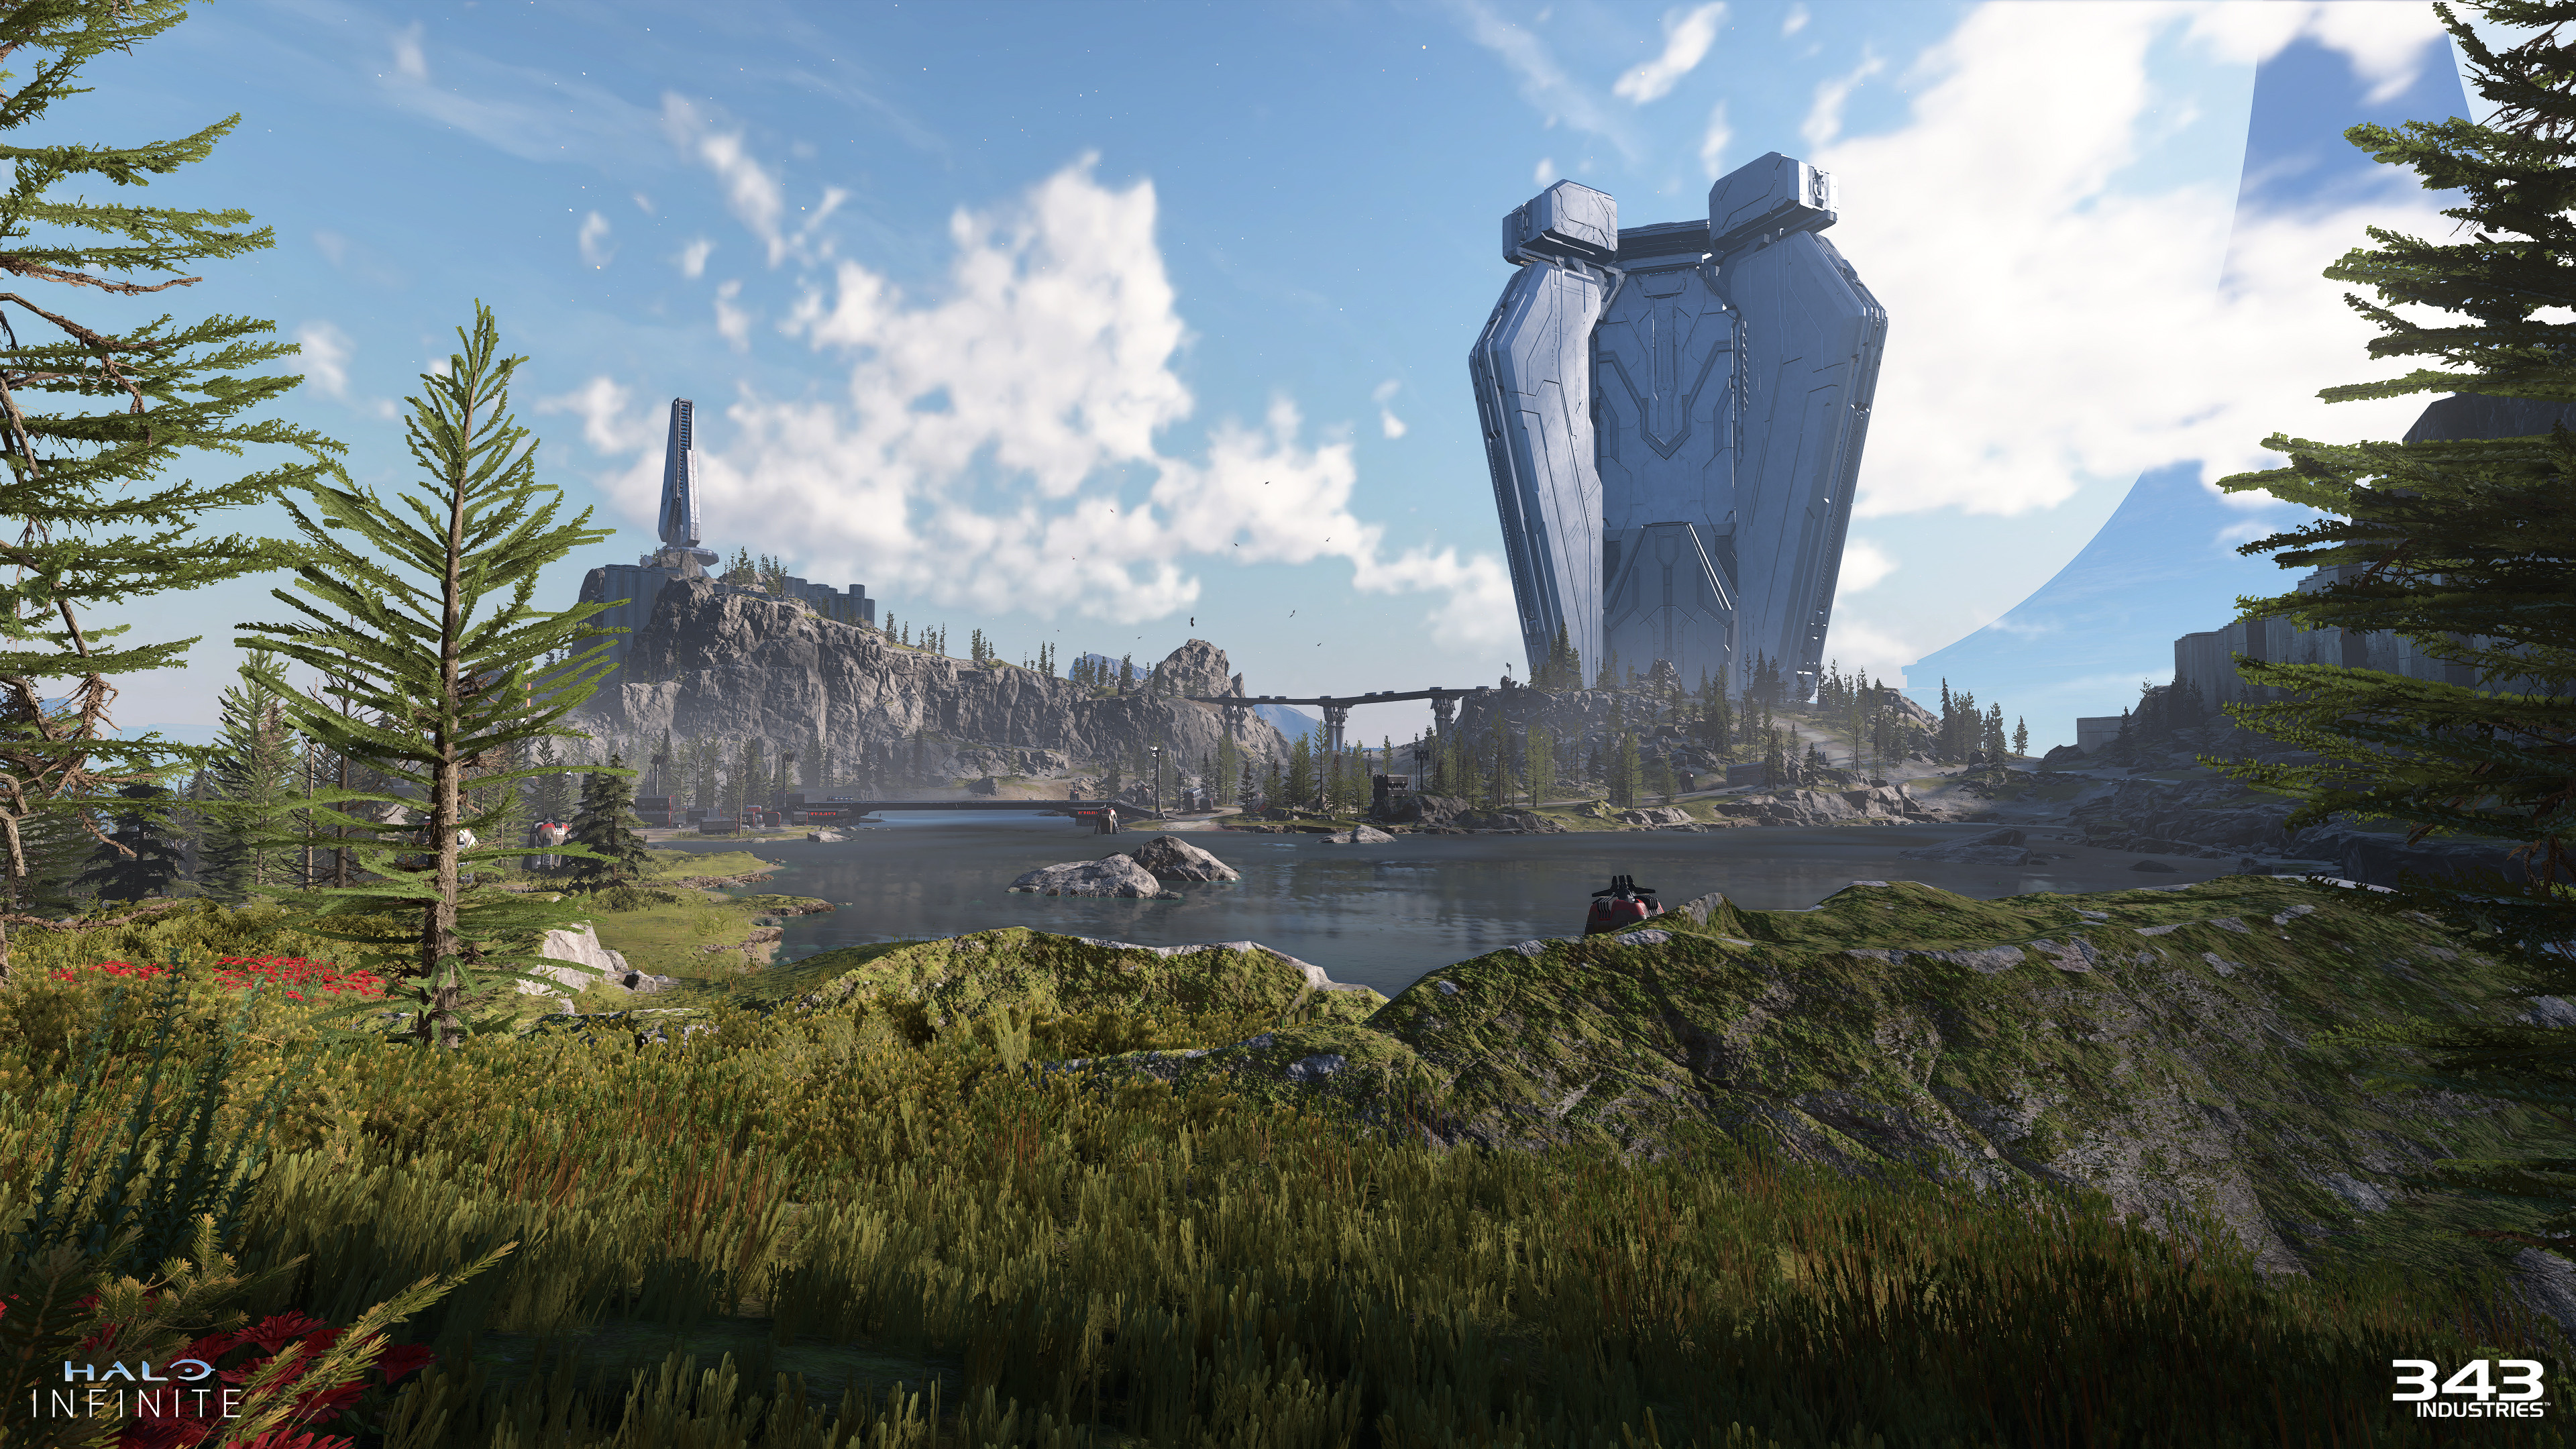 The majority of the eastern half of the map I did reflection work for Halo Infinite. This shot catches a lot of different areas I worked on well. From the large spire, to the grand lake, to the banished structures, all the way to the forerunner tower.